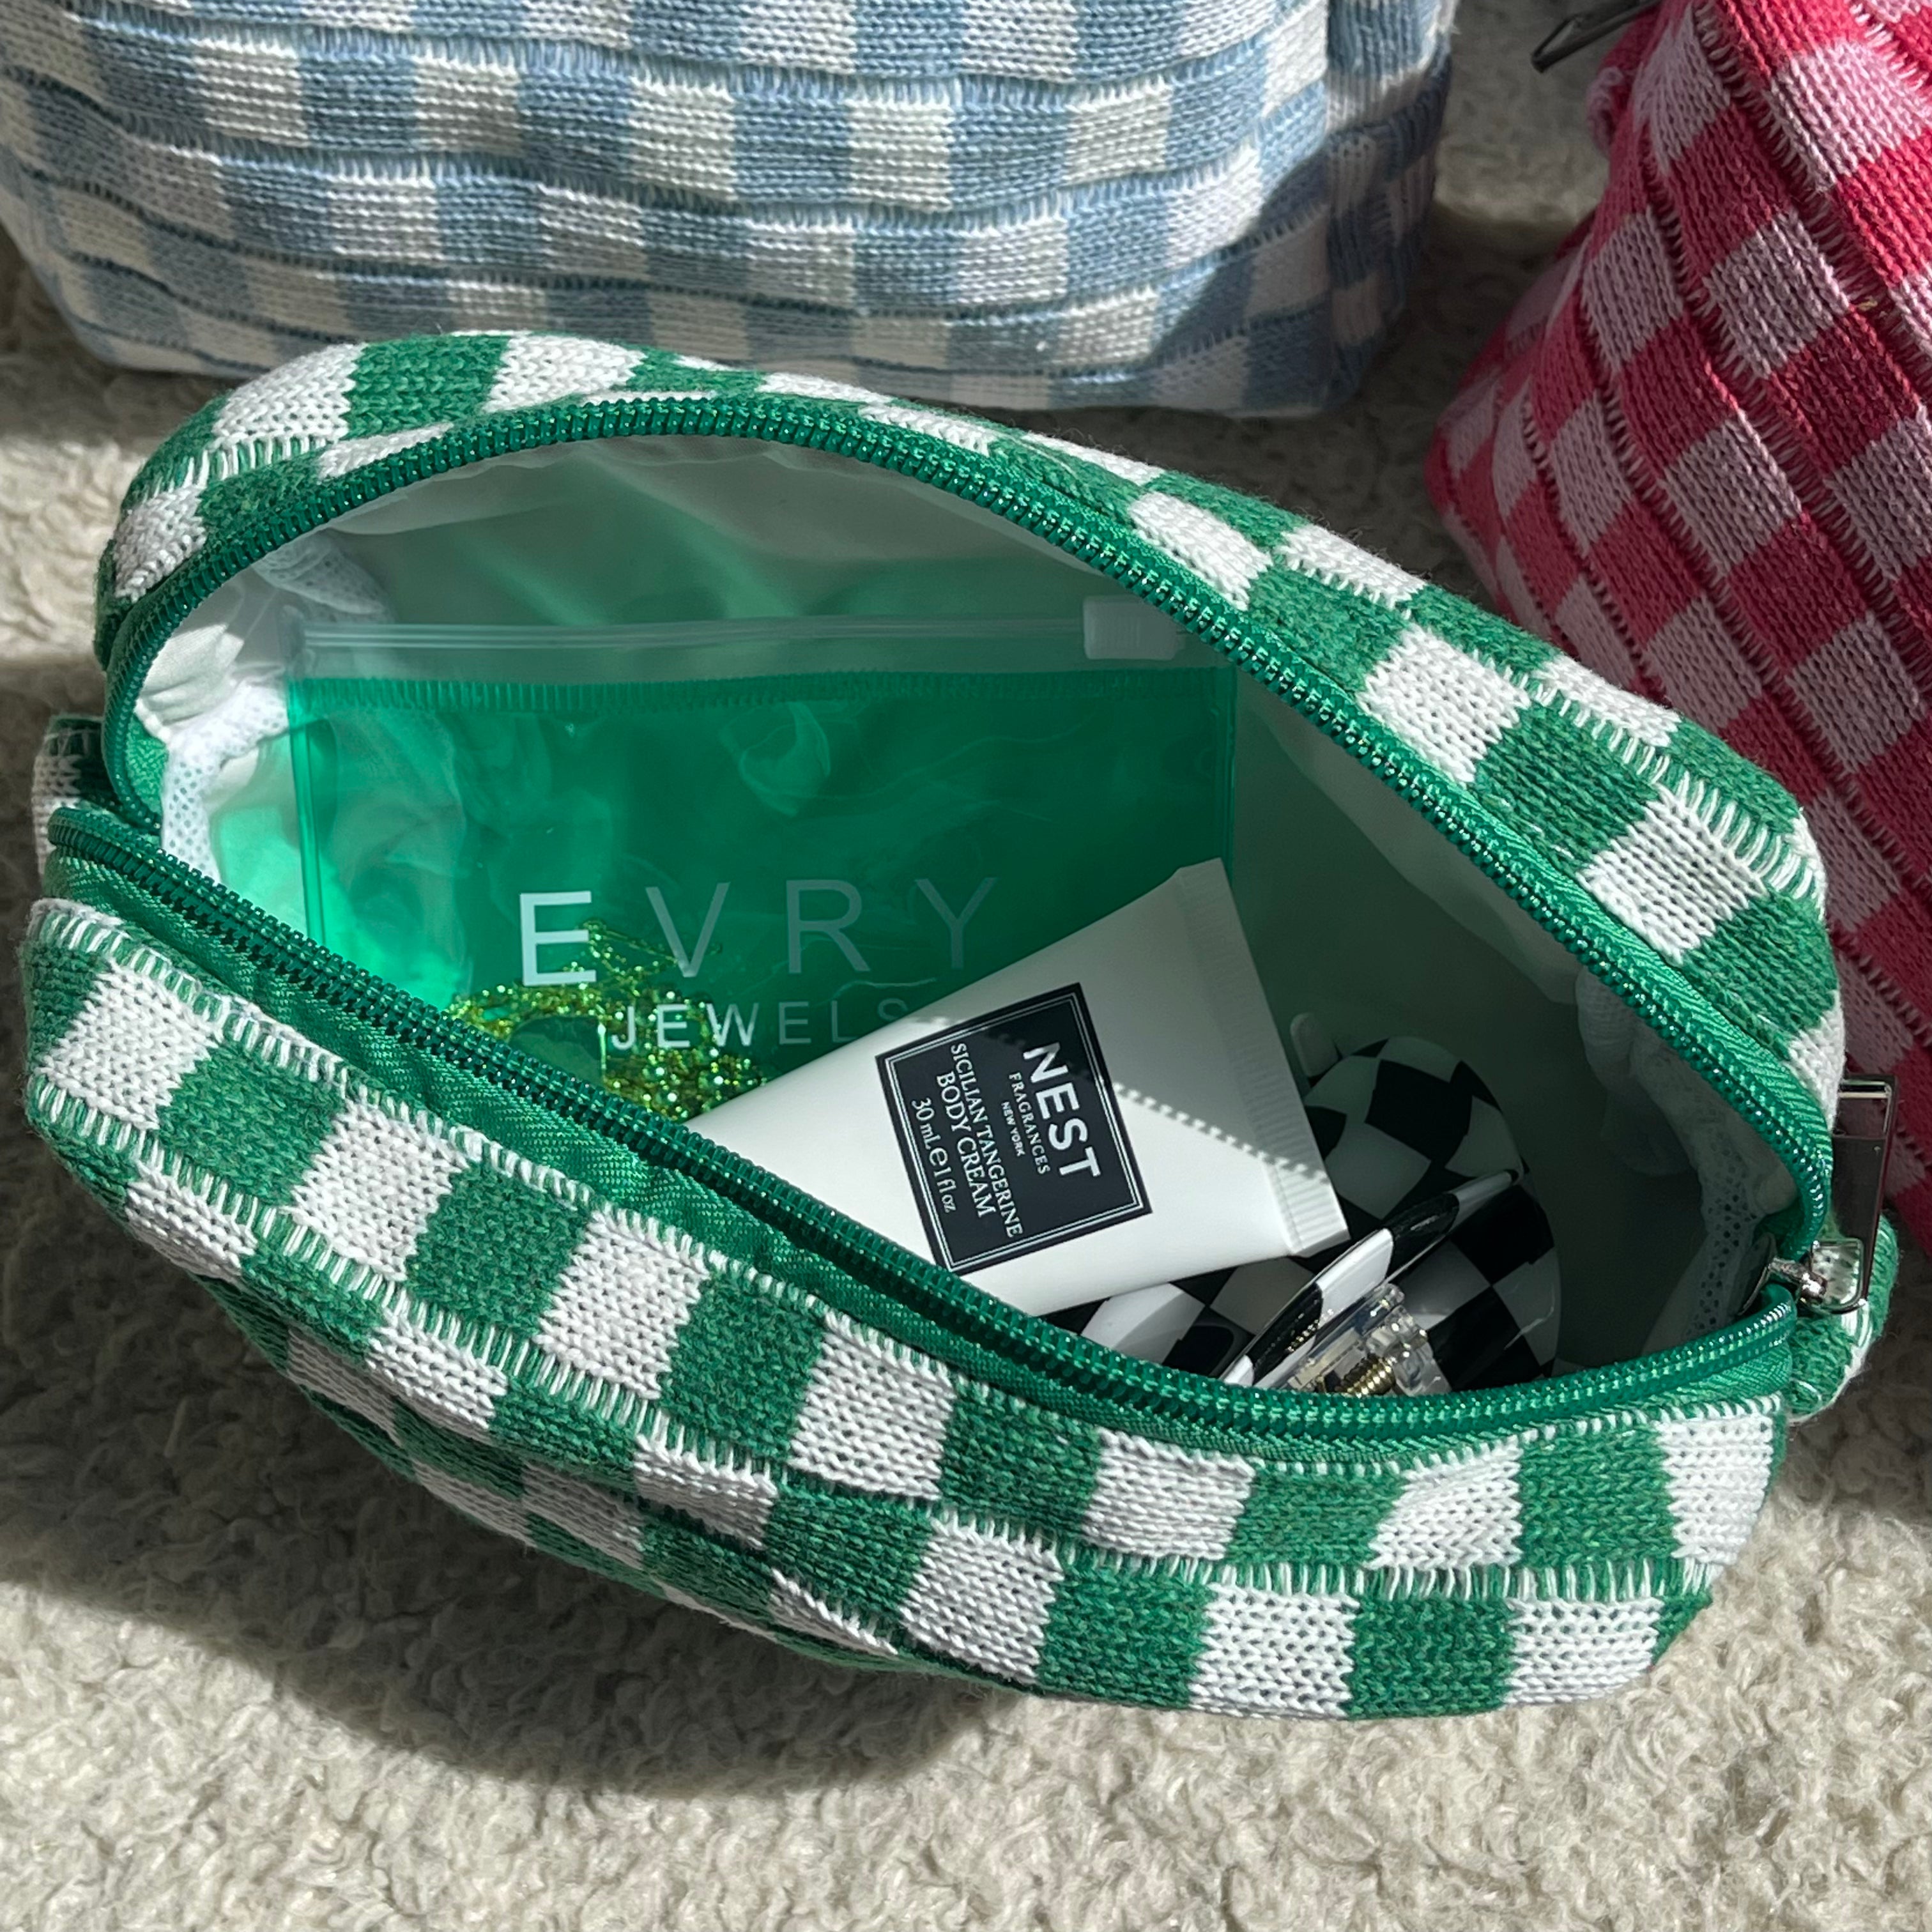 Checkered jersey bag cover